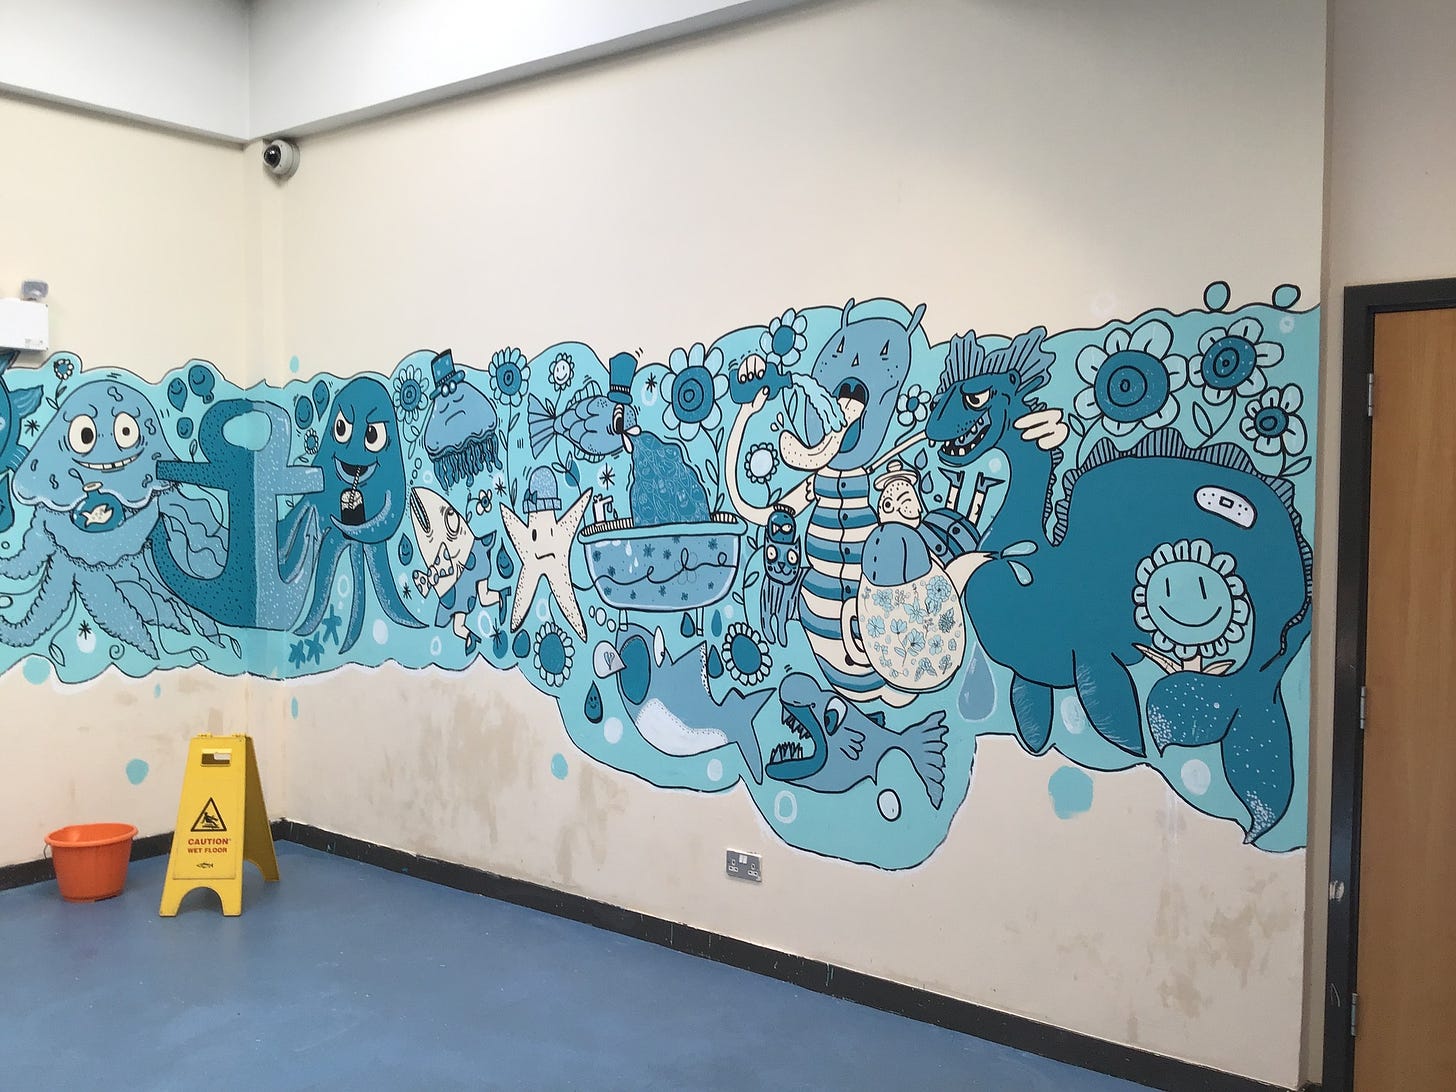 A mural on an interior library wall depicts cartoonish sea creatures and ocean life in a multitude of shades of blue and white paint.